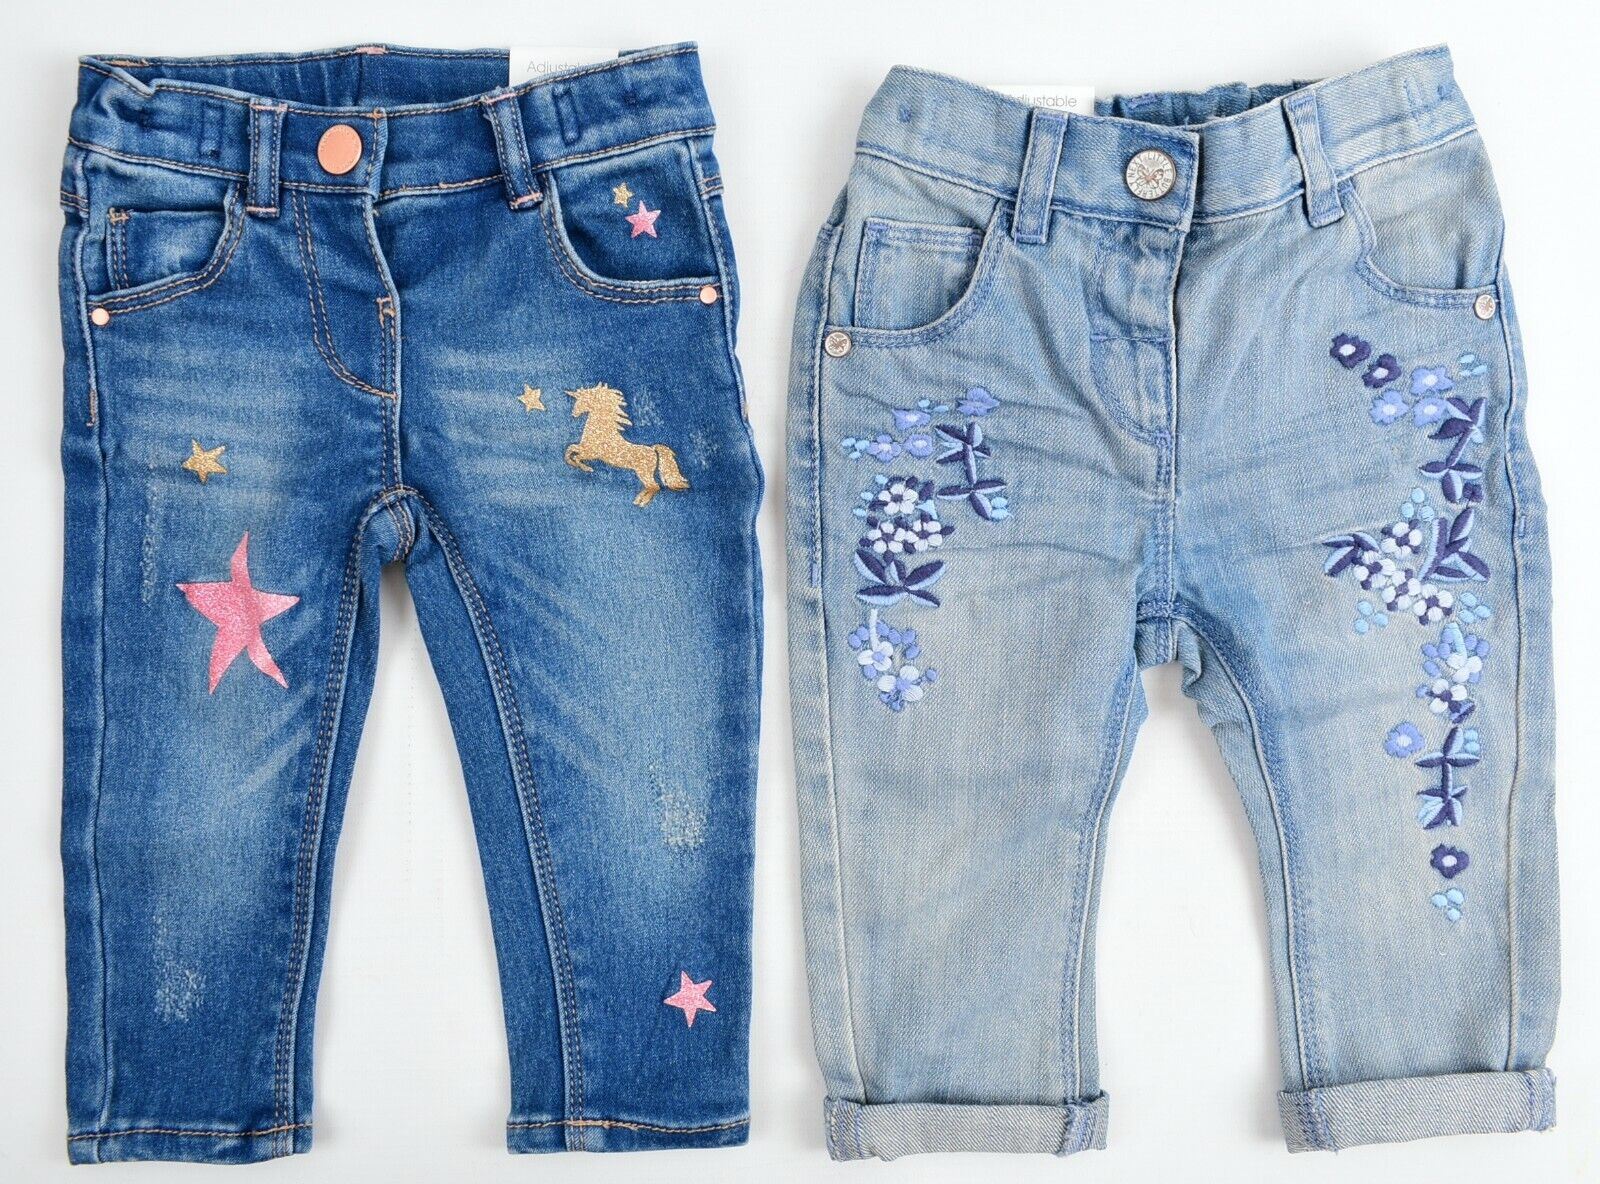 NEXT Bundle of 2x Baby Girls' Jeans, Floral/Star Print, size 6-9 months